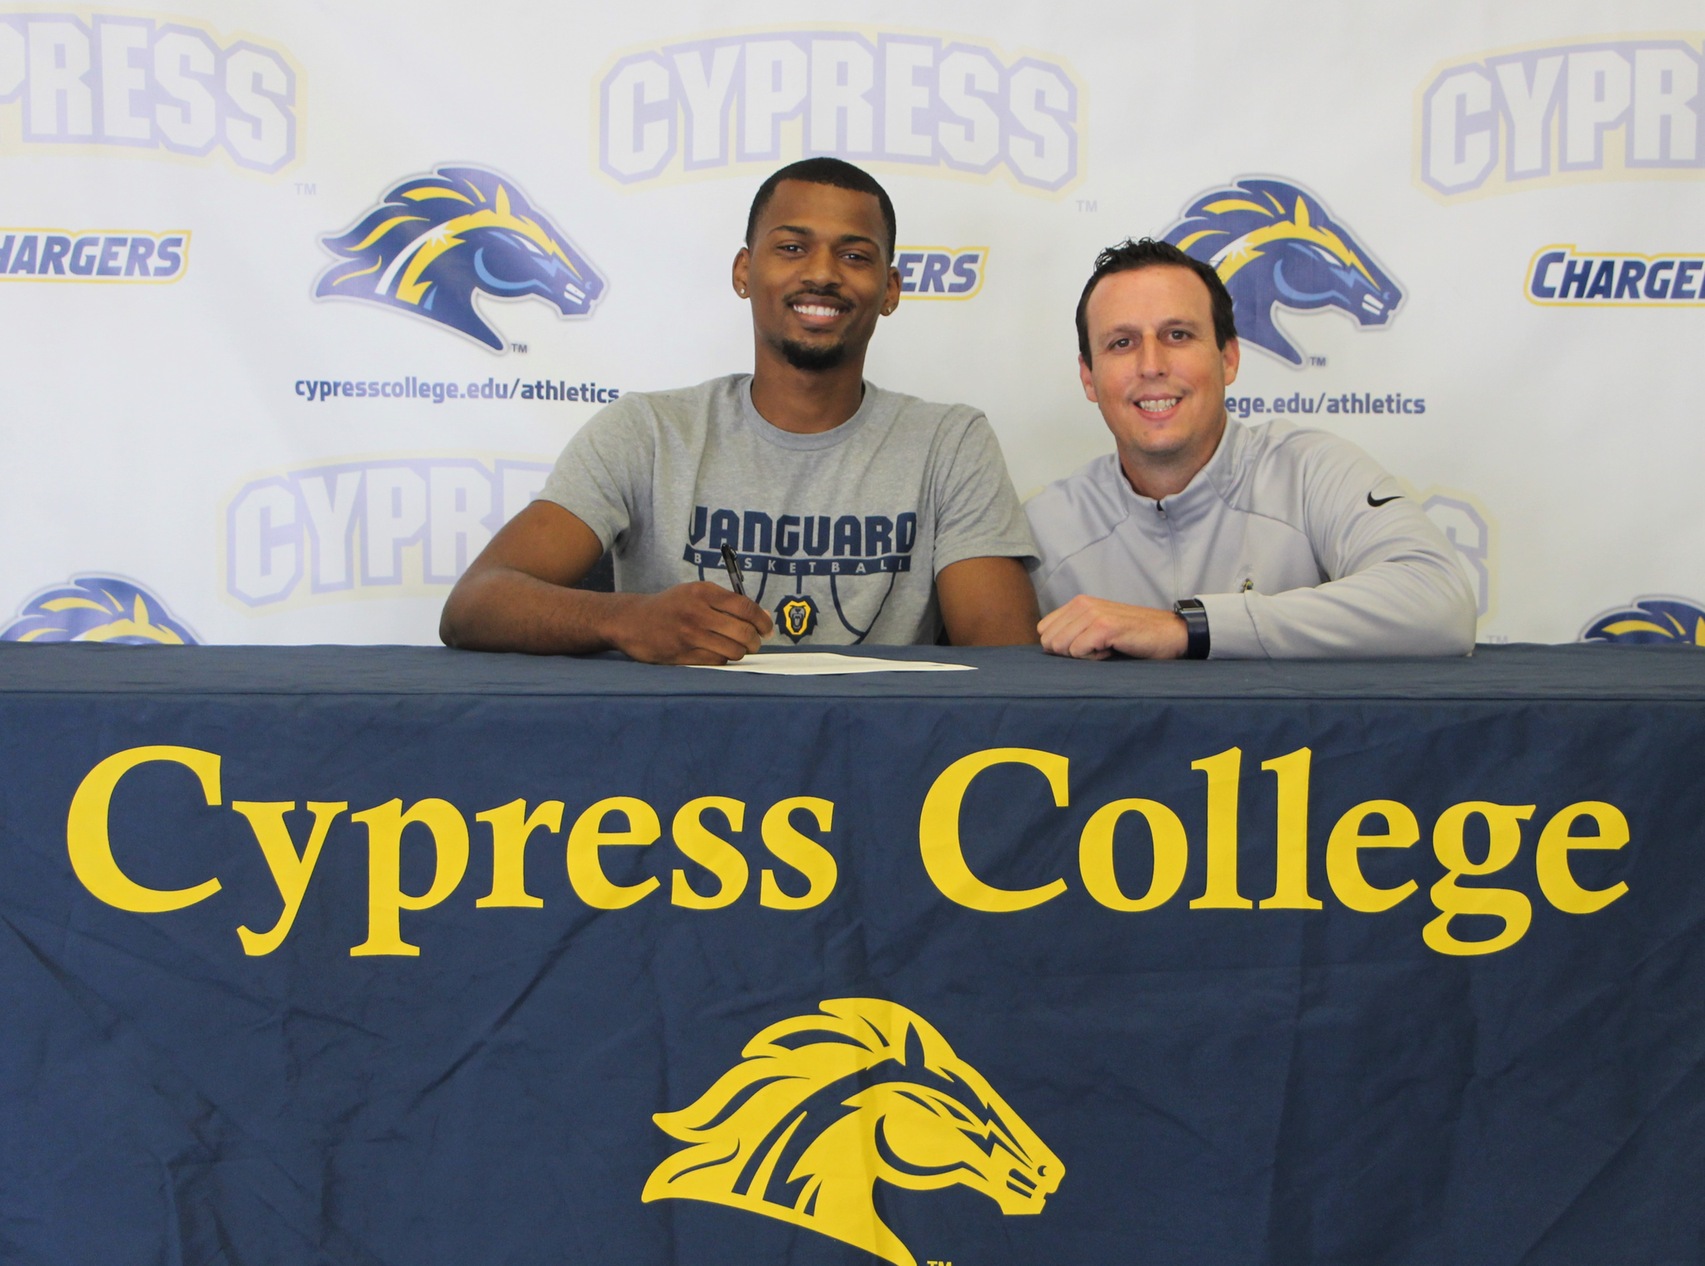 Mike Magee and Cypress College Men's Basketball Coach Drew Alhadeff